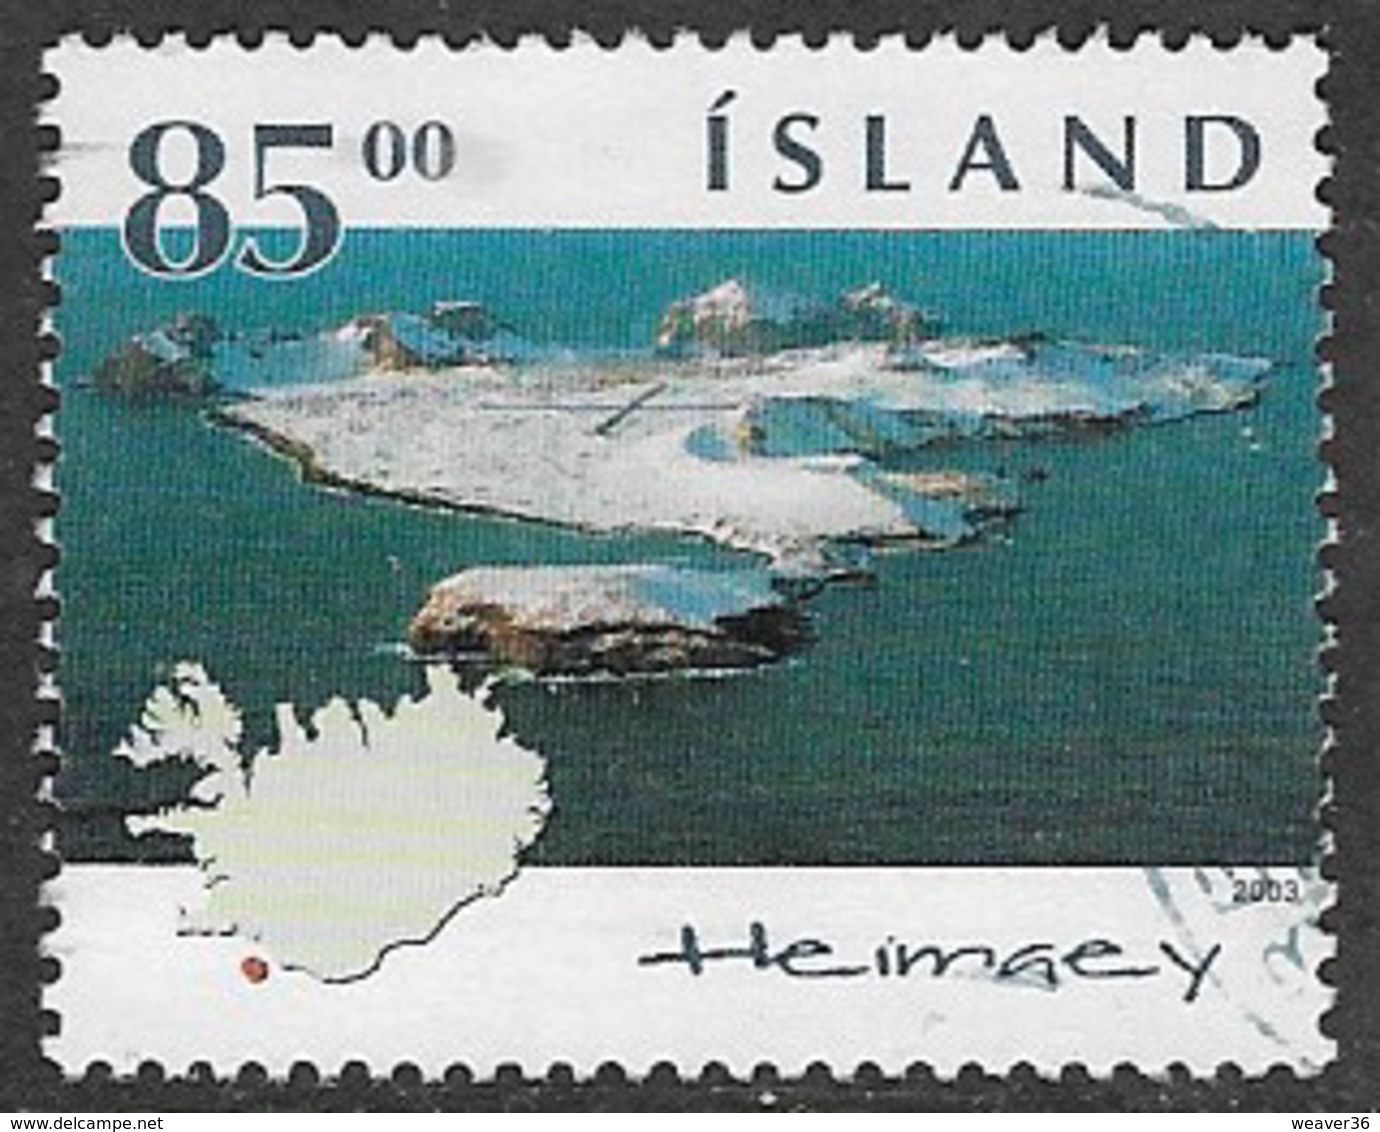 Iceland SG1061 2003 Islands (3rd Series) 85k Good/fine Used [39/31891/6D] - Used Stamps